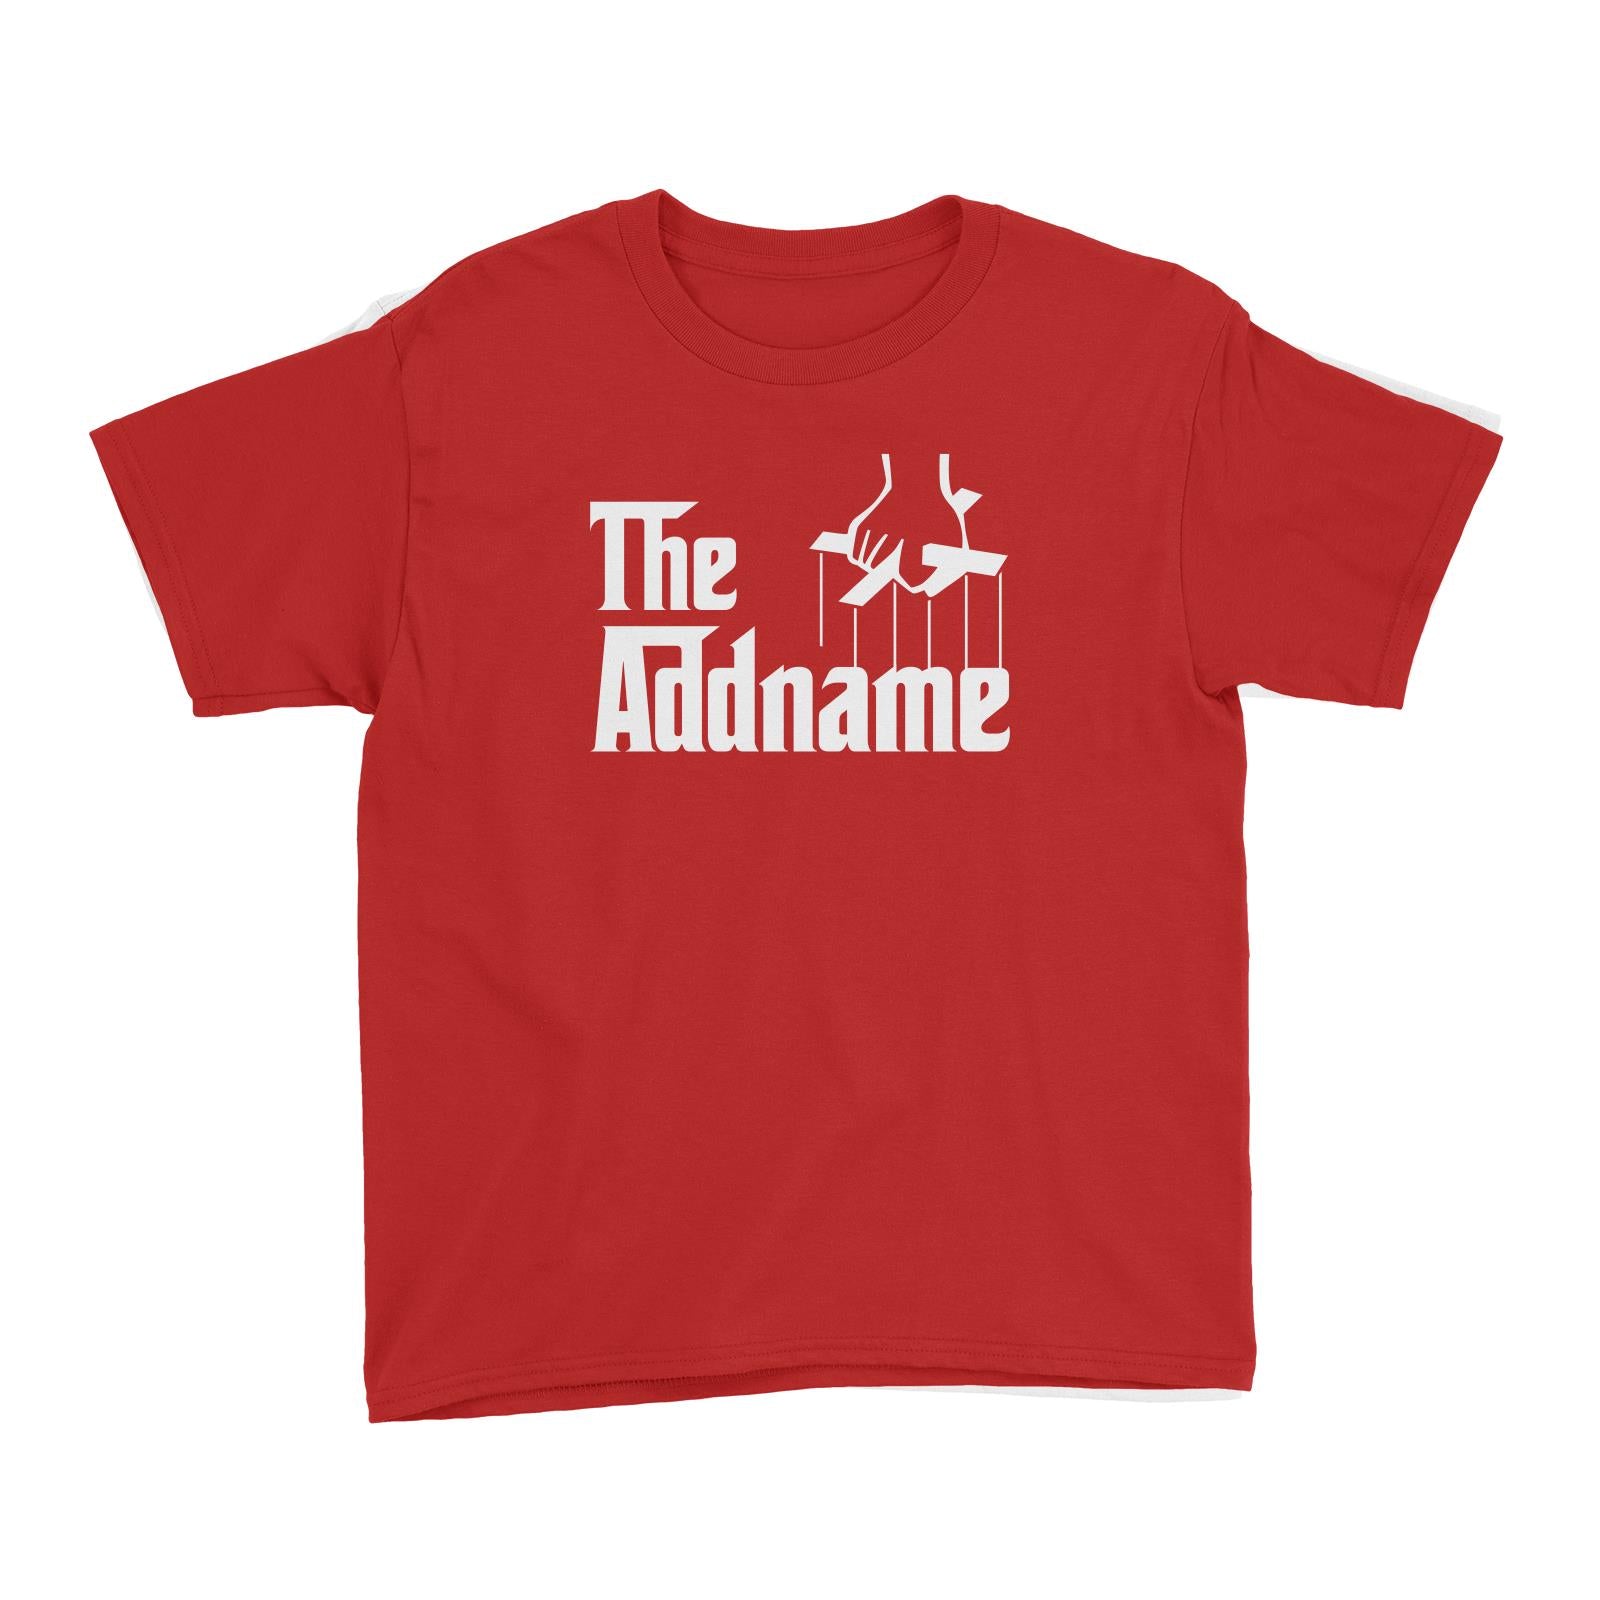 The Addname Kid's T-Shirt Godfather Matching Family Personalizable Designs